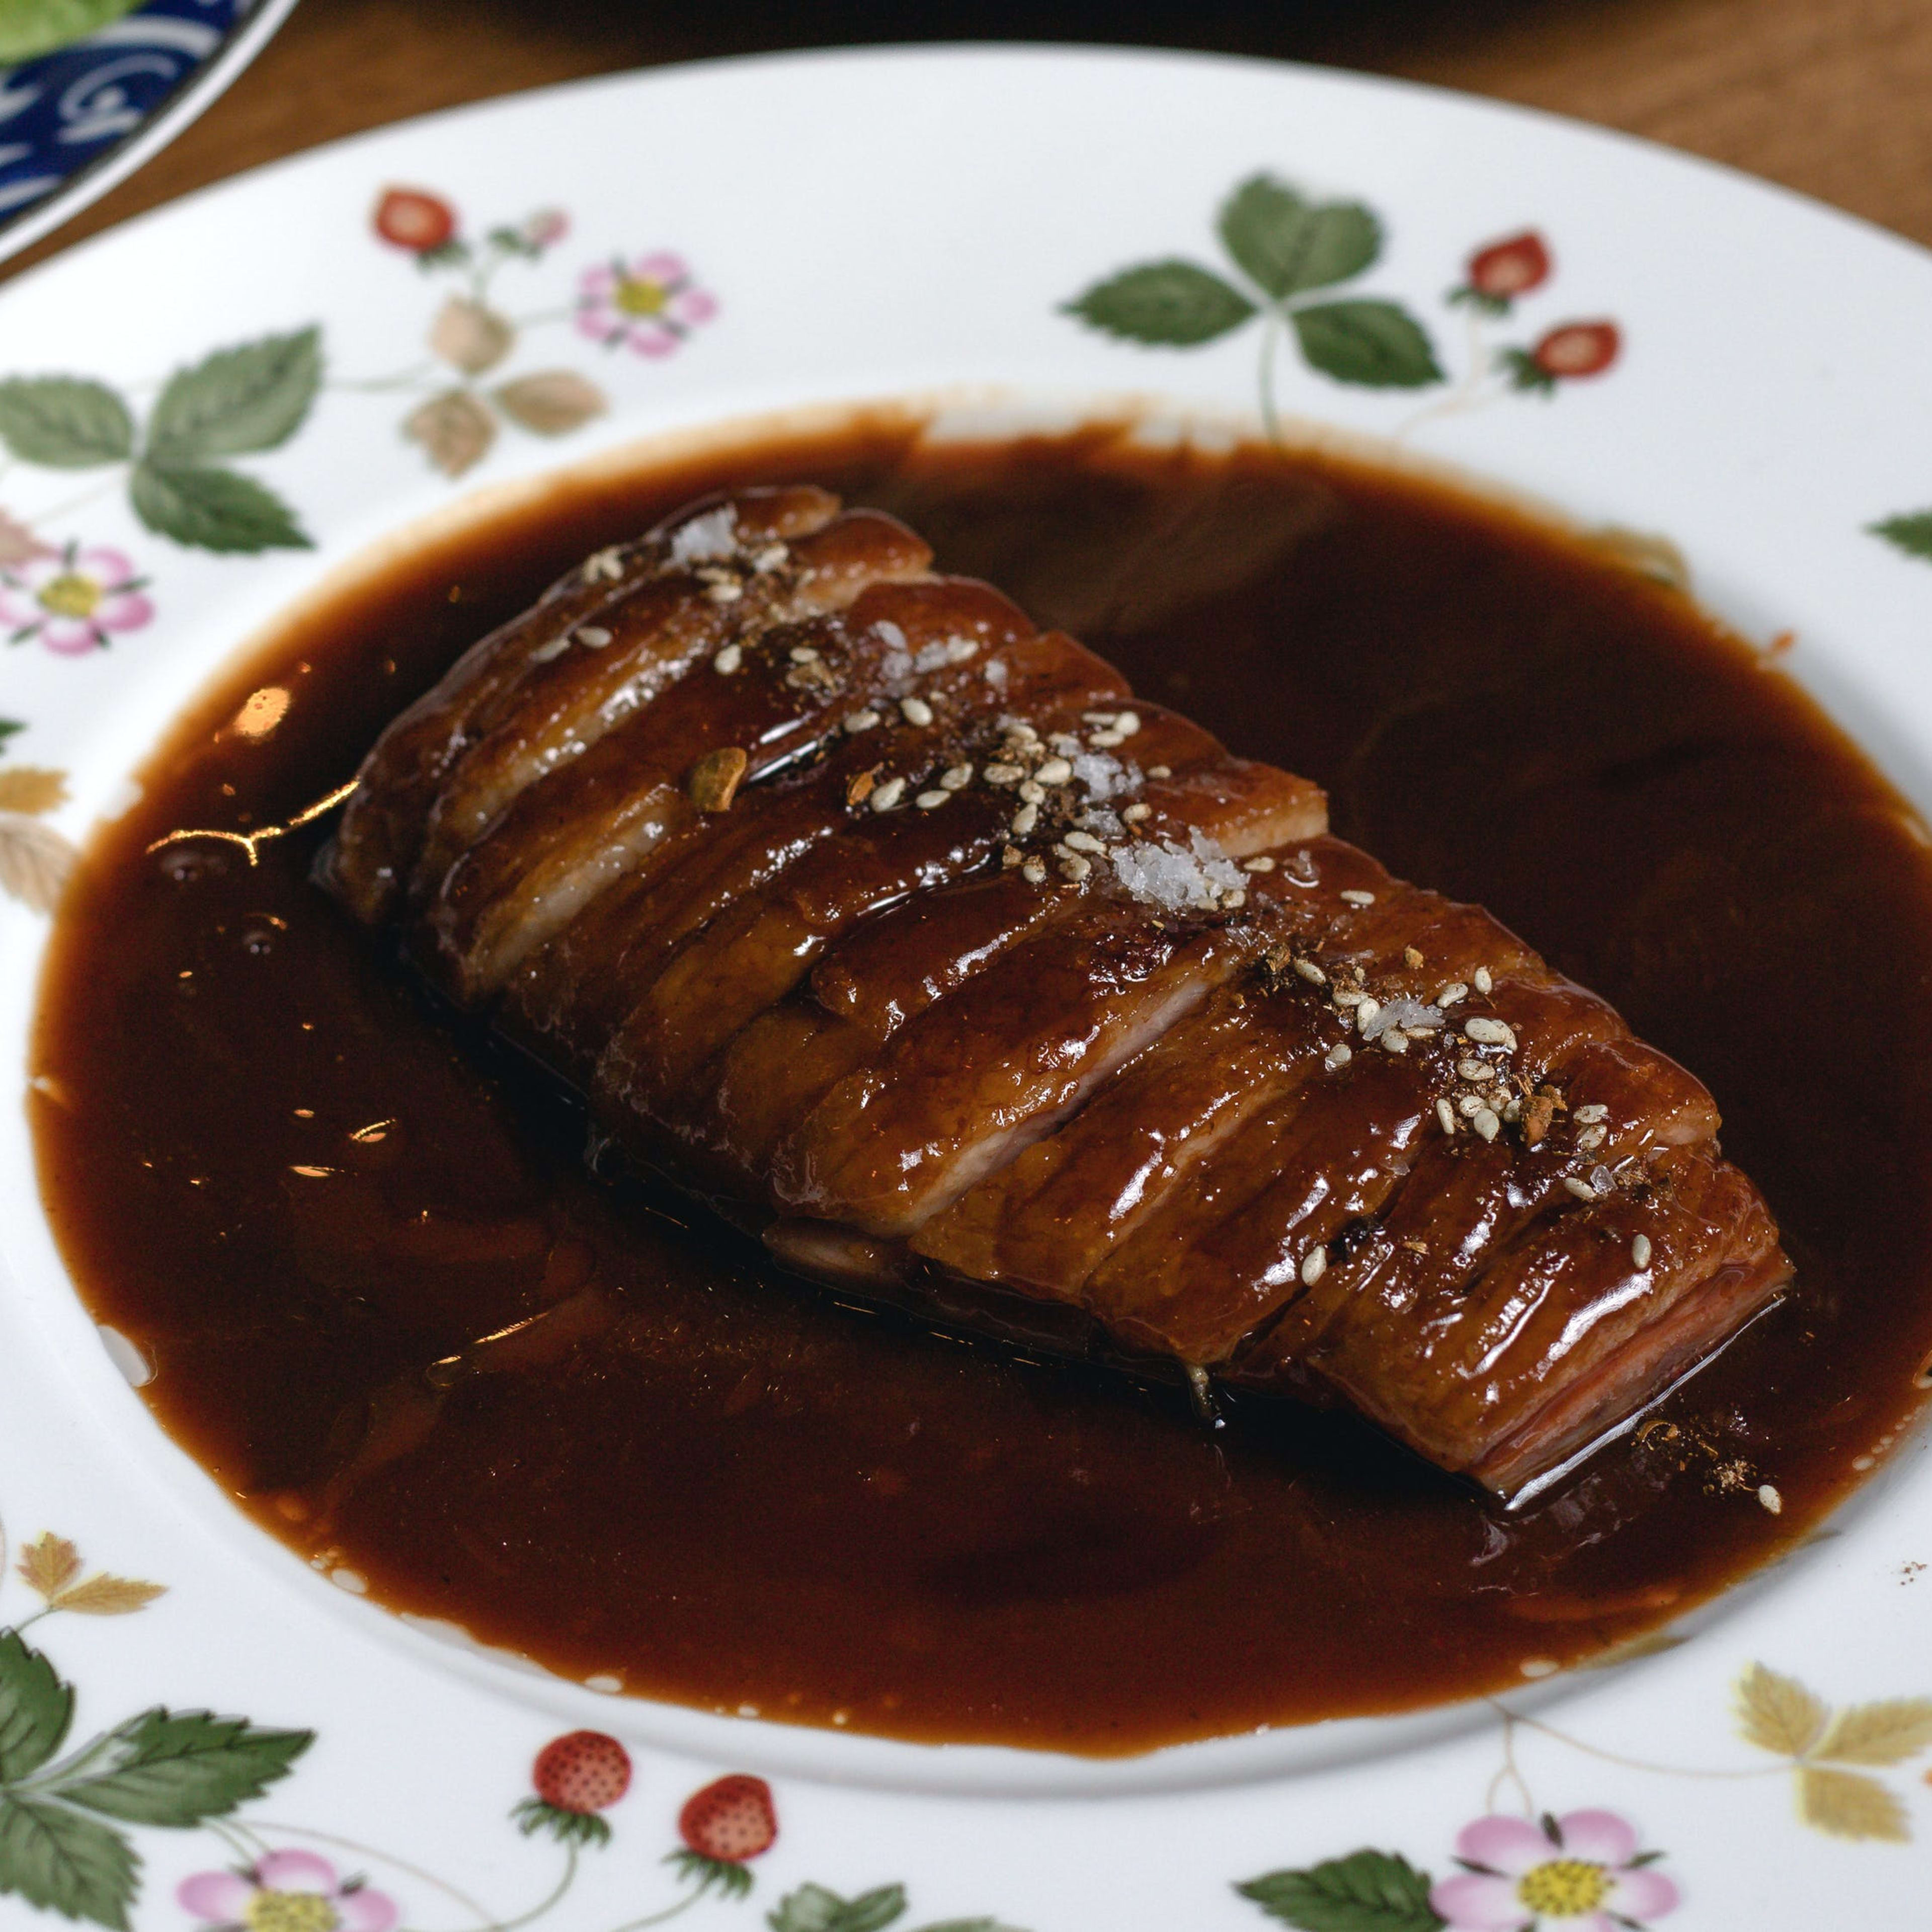 sliced duck in pool of sauce on decorative porcelain plate